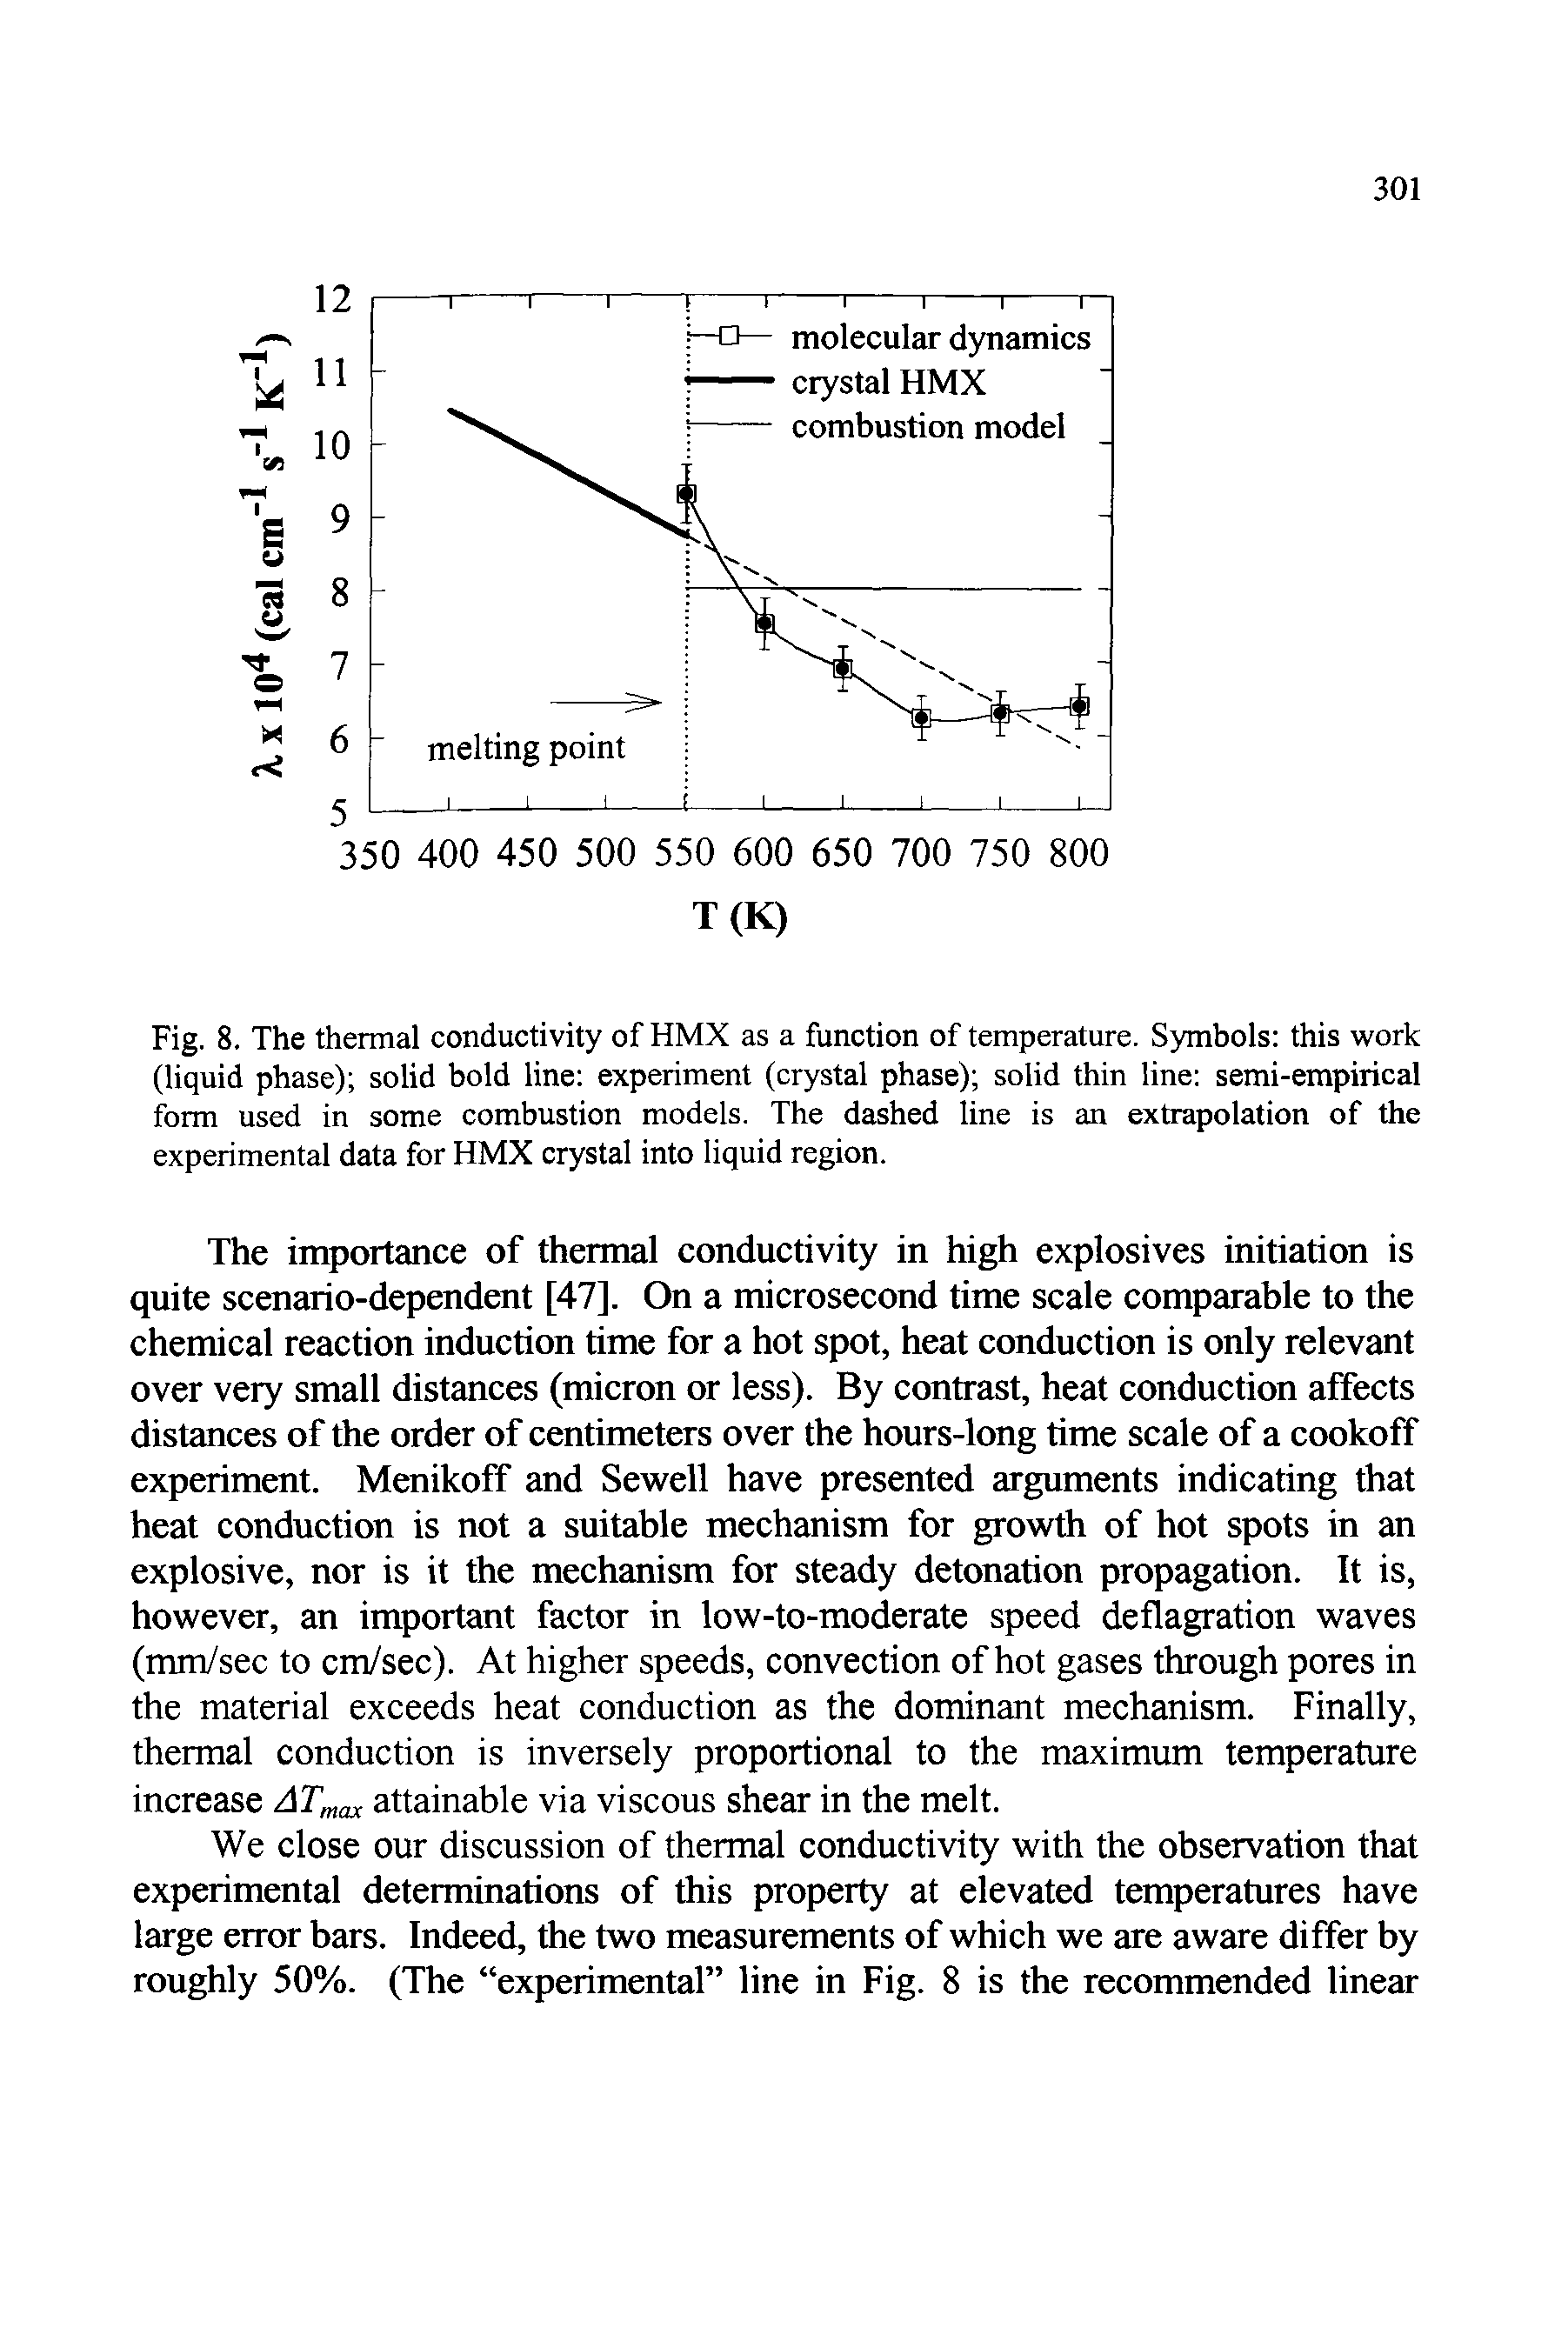 Fig. 8. The thermal conductivity of HMX as a function of temperature. Symbols this work (liquid phase) solid bold line experiment (crystal phase) solid thin line semi-empirical form used in some combustion models. The dashed line is an extrapolation of the experimental data for HMX crystal into liquid region.